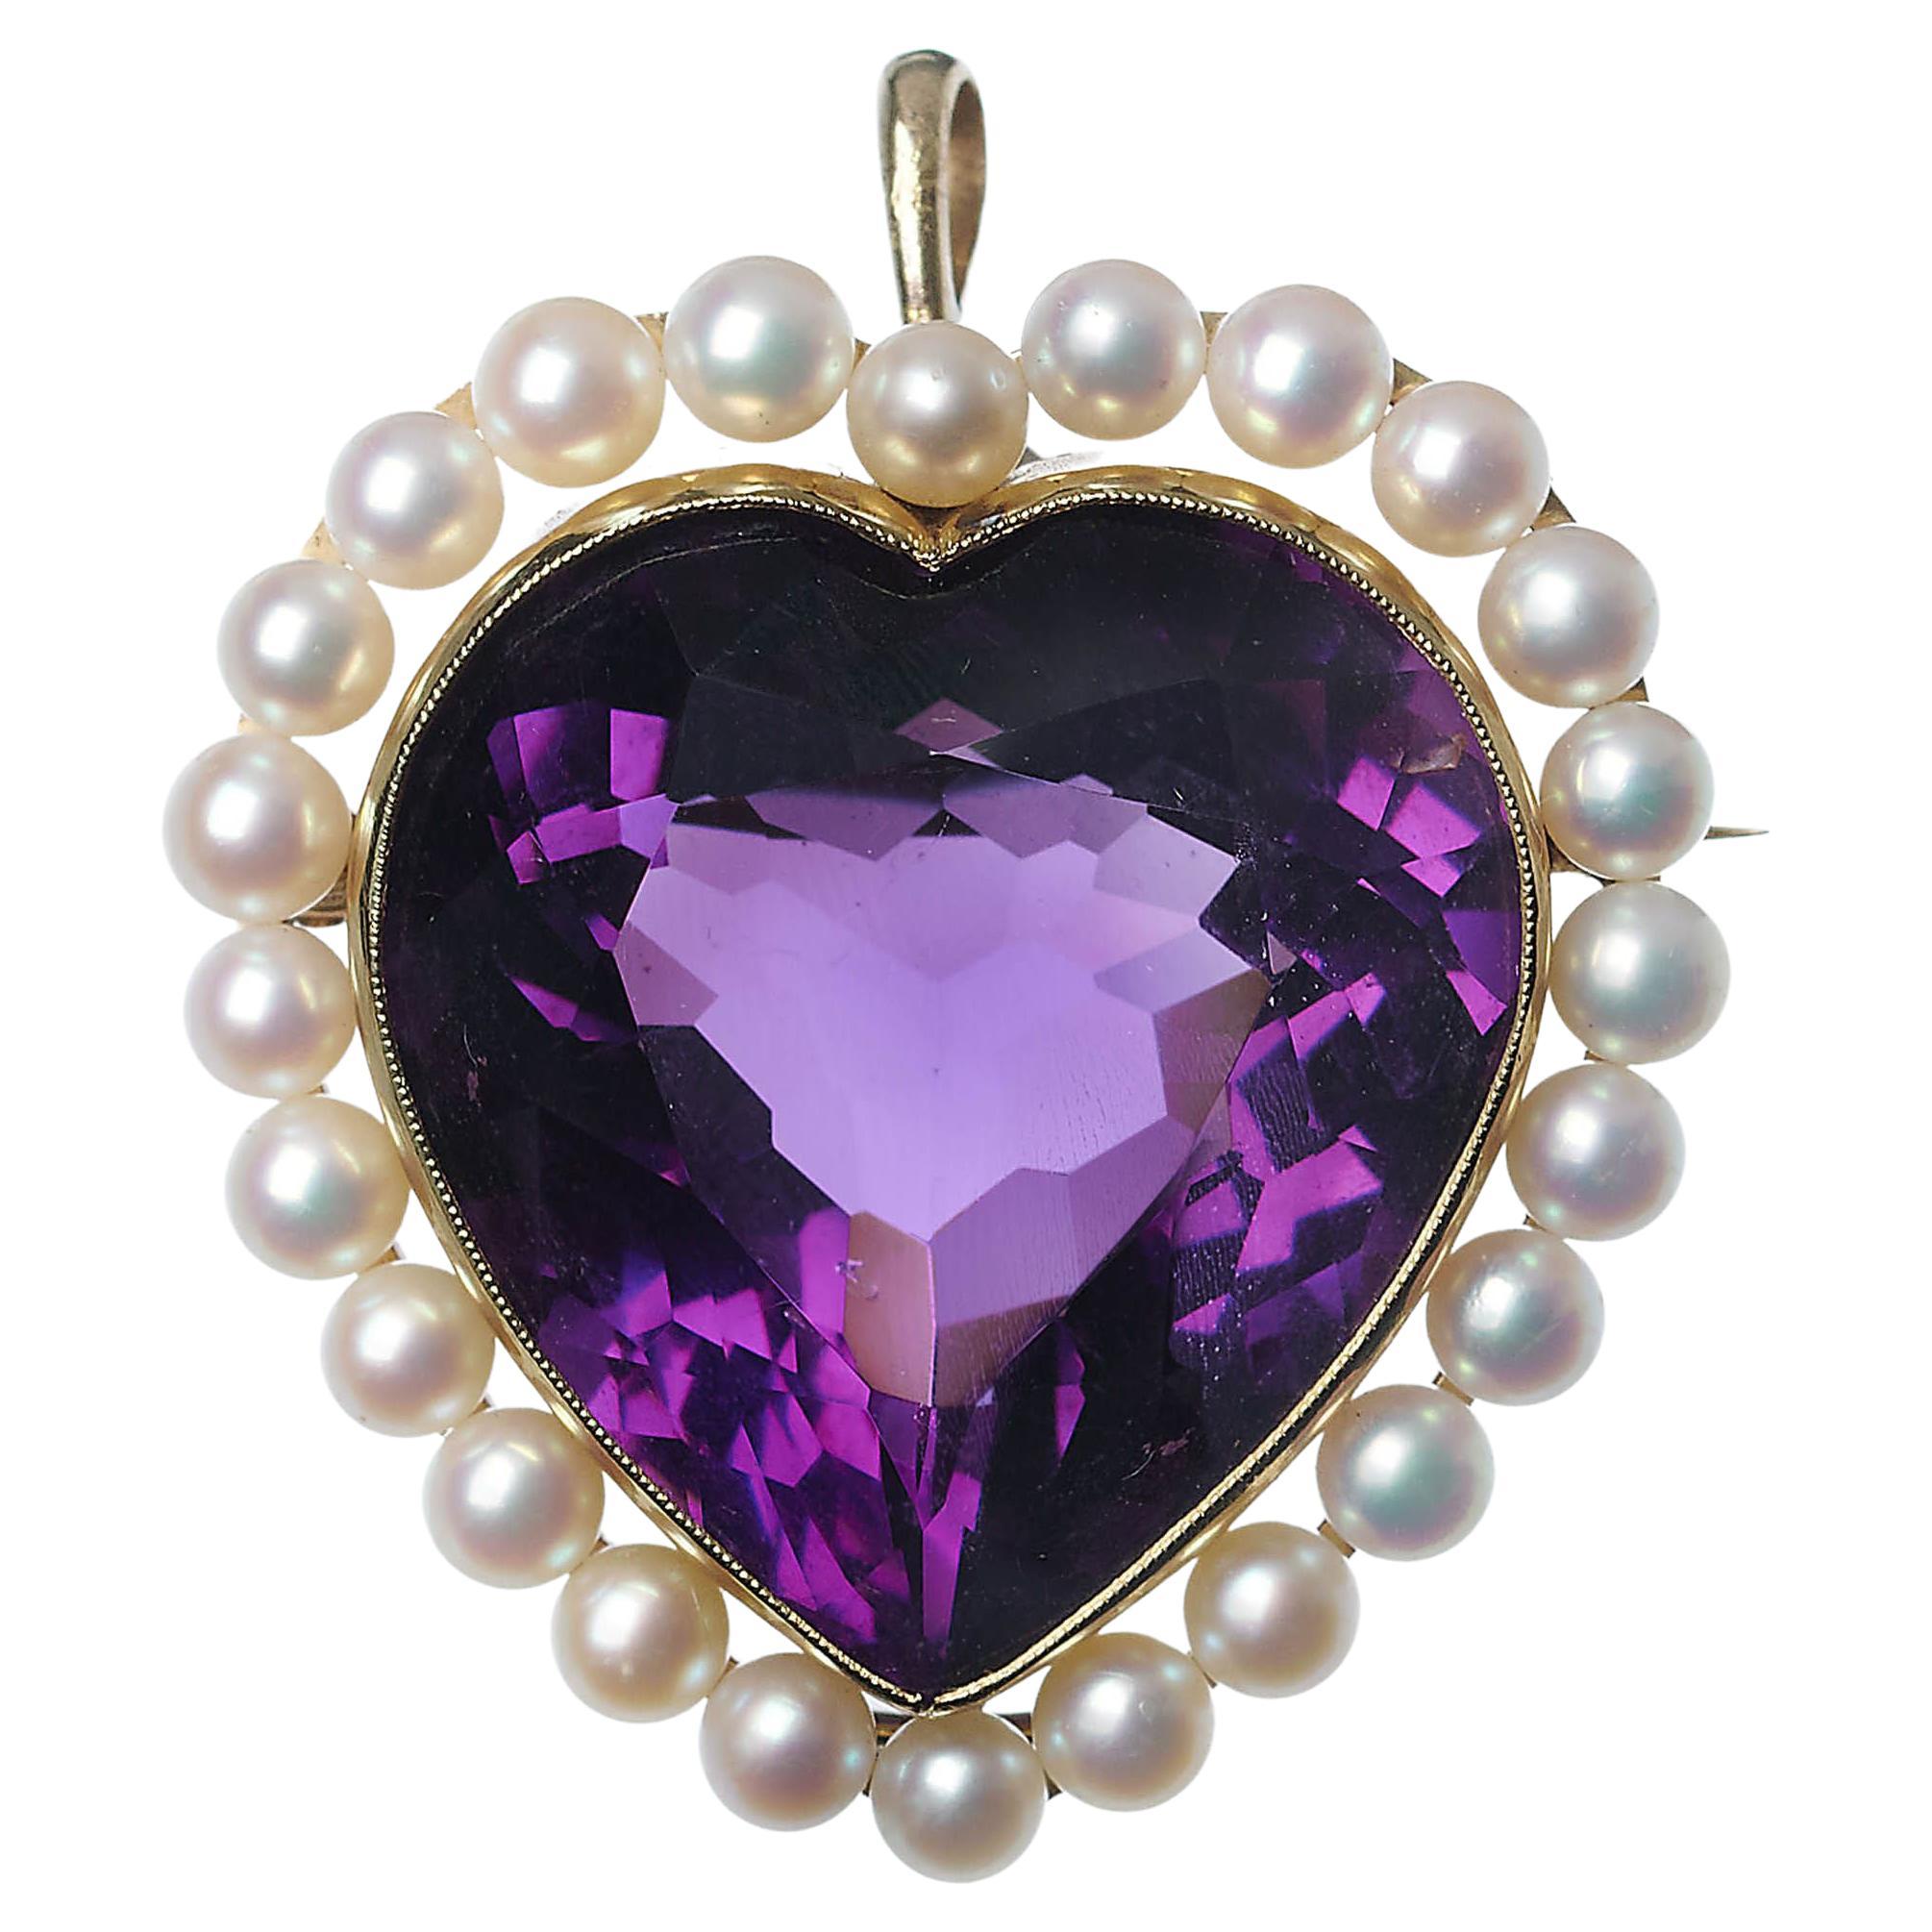 Vintage Amethyst, Cultured Pearl And Gold Heart Brooch Pendant, Circa 1970 For Sale